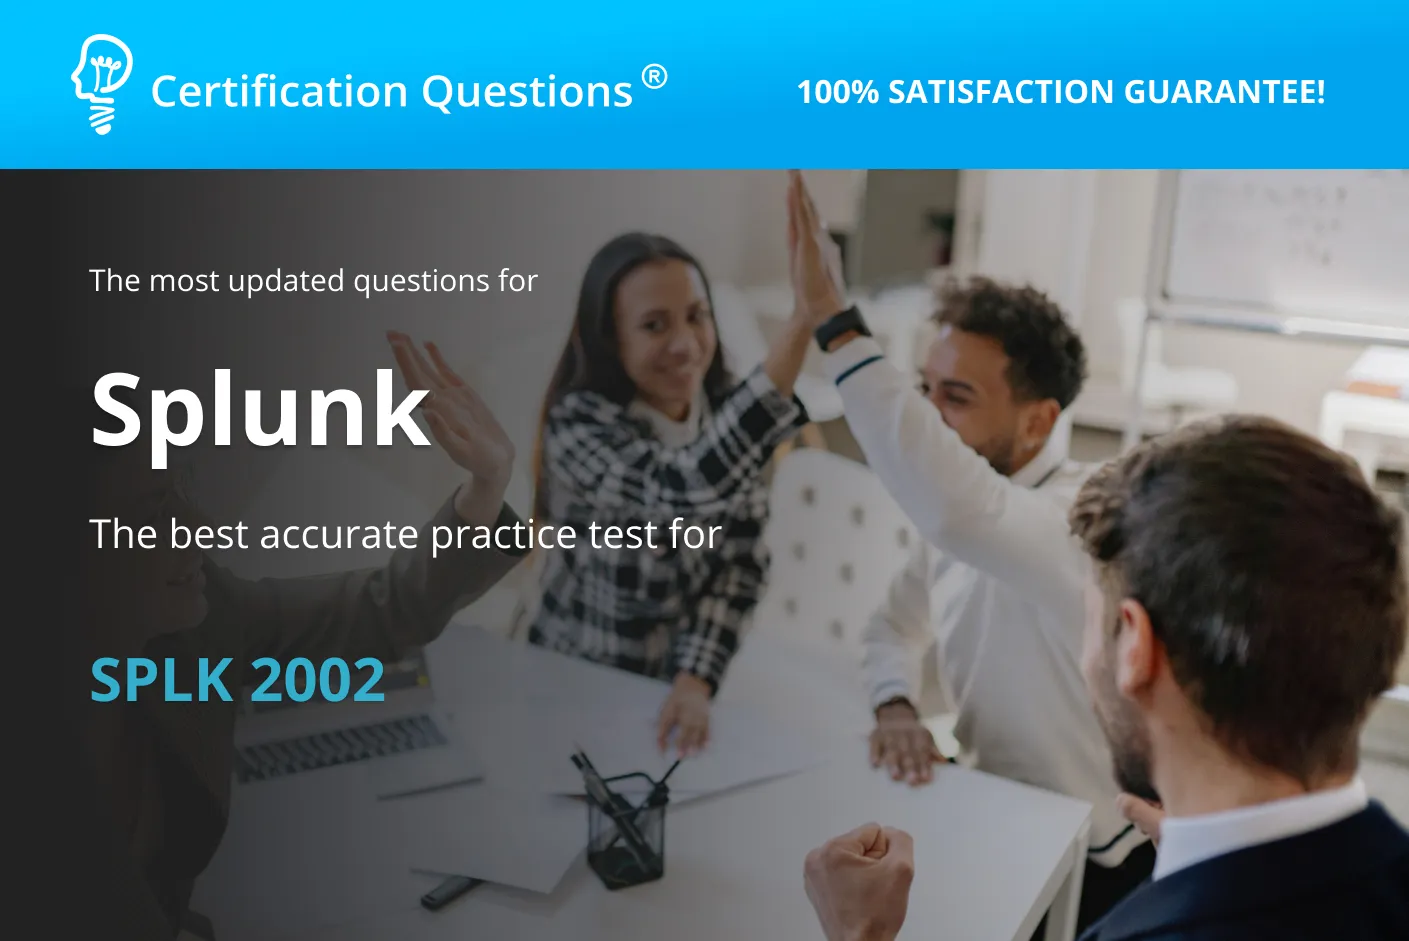 This image is related to the splunk enterprise certified architect exam questions in the United States of America